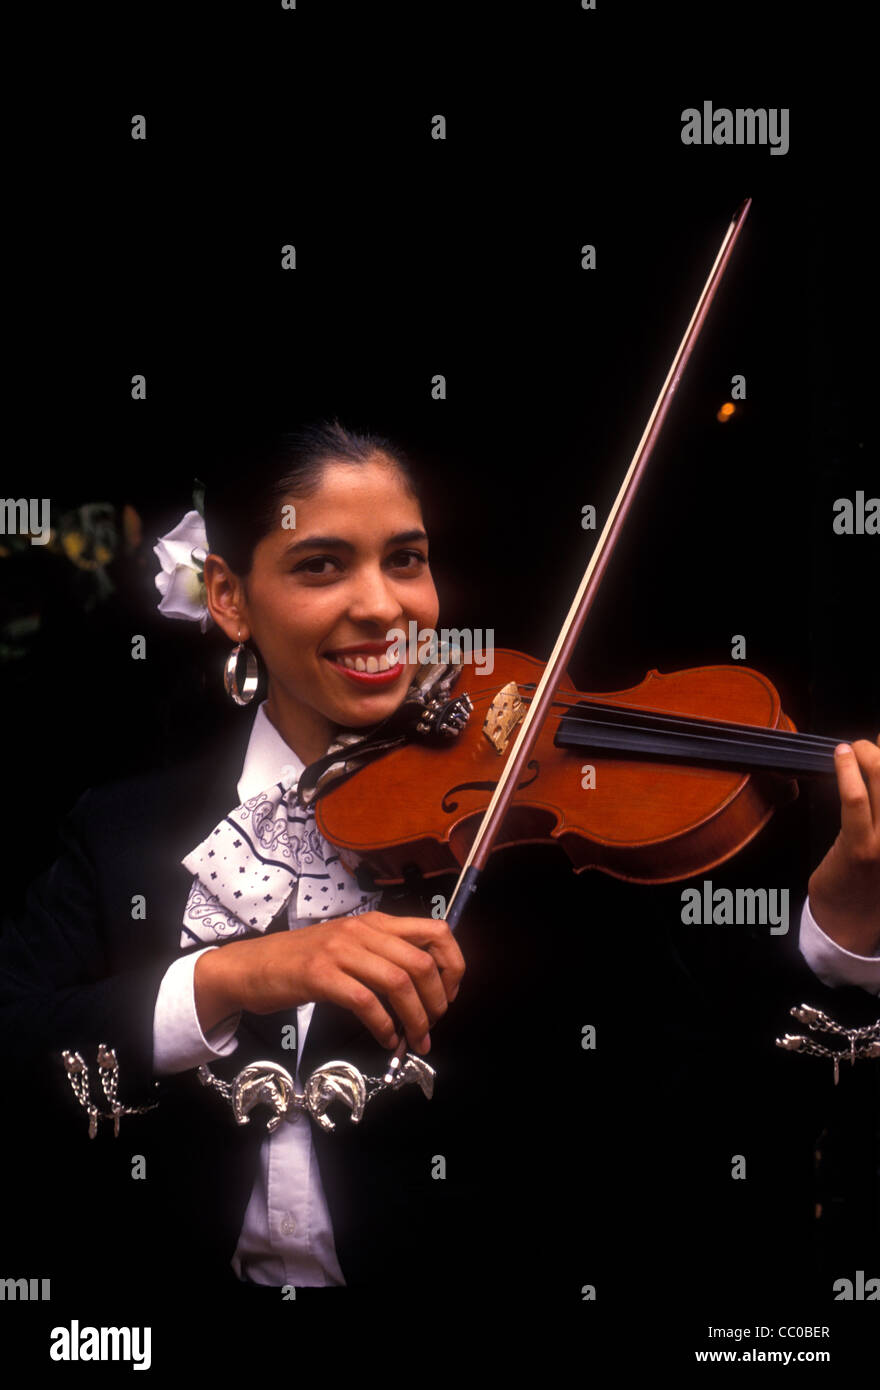 1, one, Mexican woman, Mexican, woman, violinist, playing violin, violin, violin player, musician, mariachi band, Tlaquepaque, Jalisco State, Mexico Stock Photo